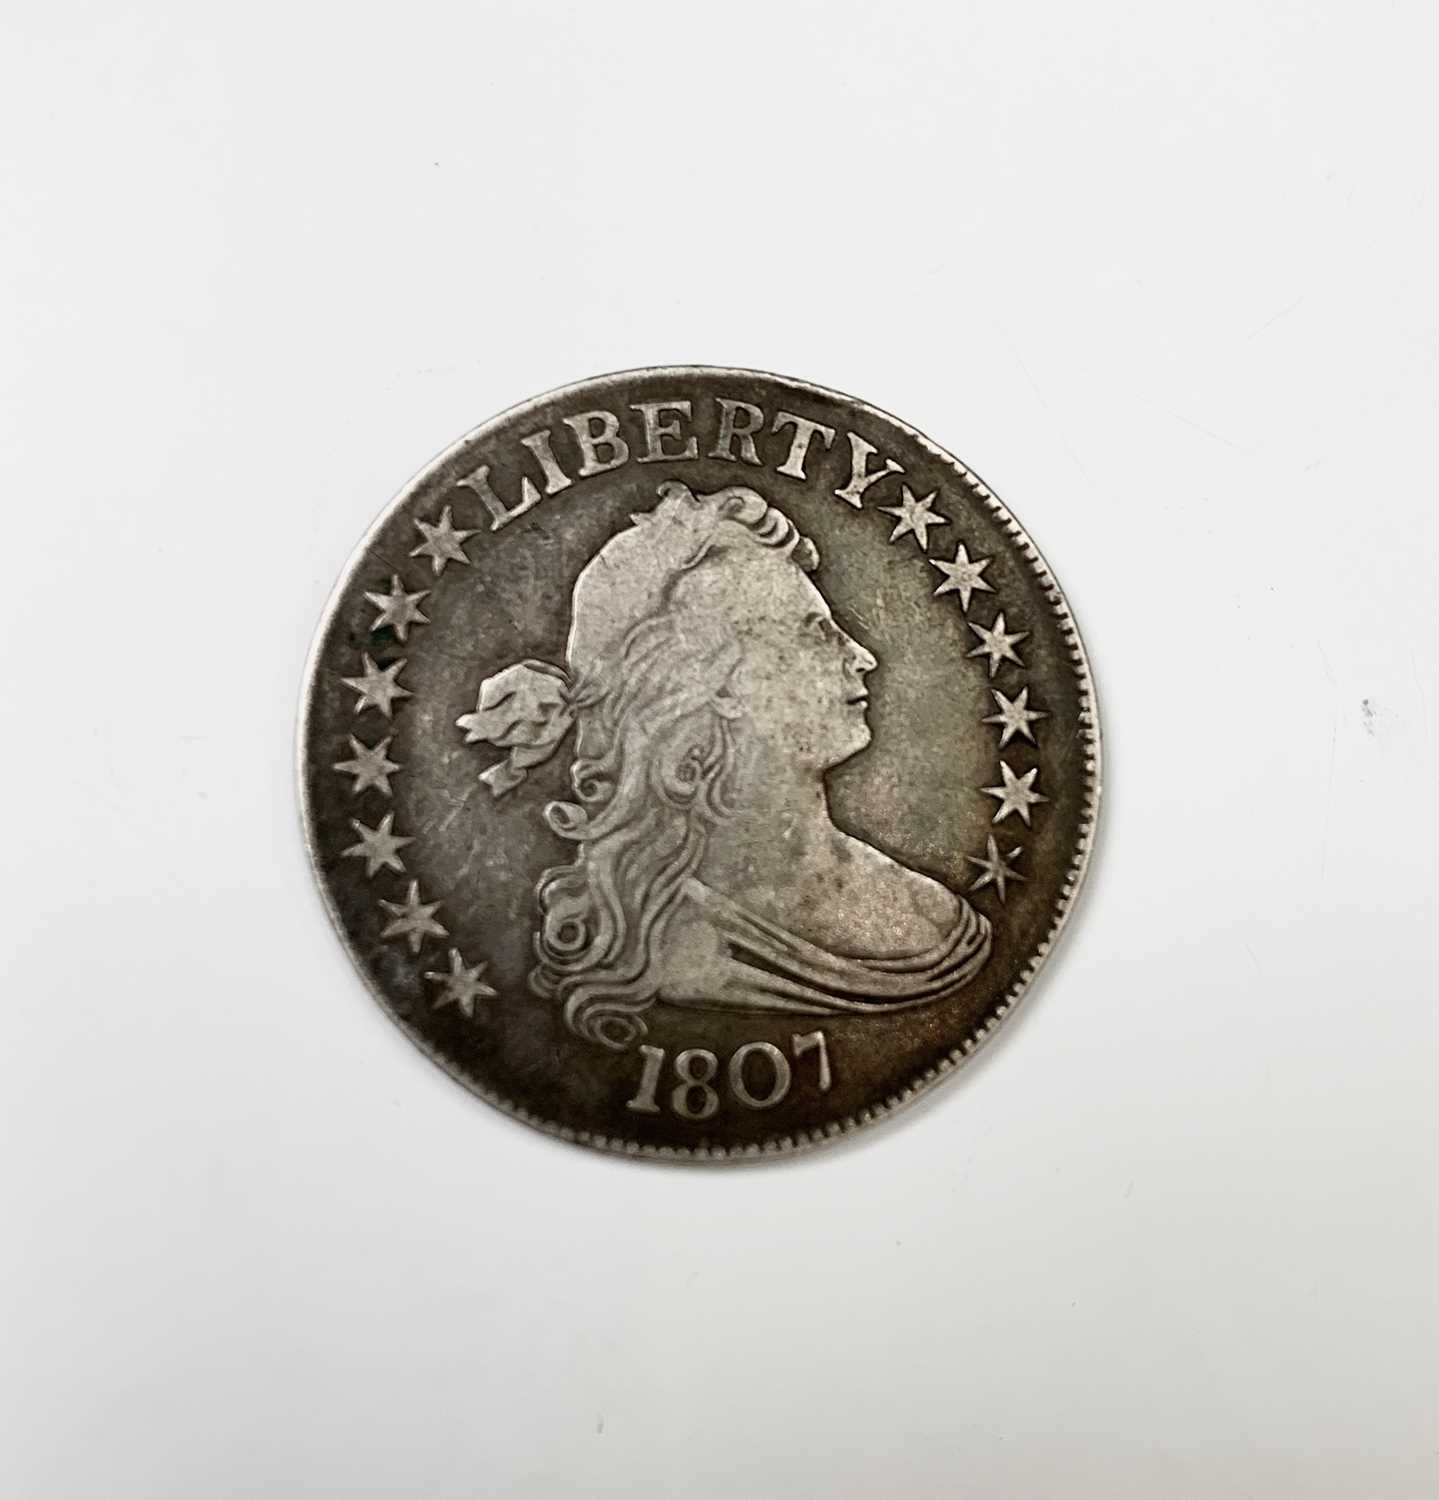 U.S.A. A first issue draped bust Half Dollar 1807 - last year of issue in Fine Condition.